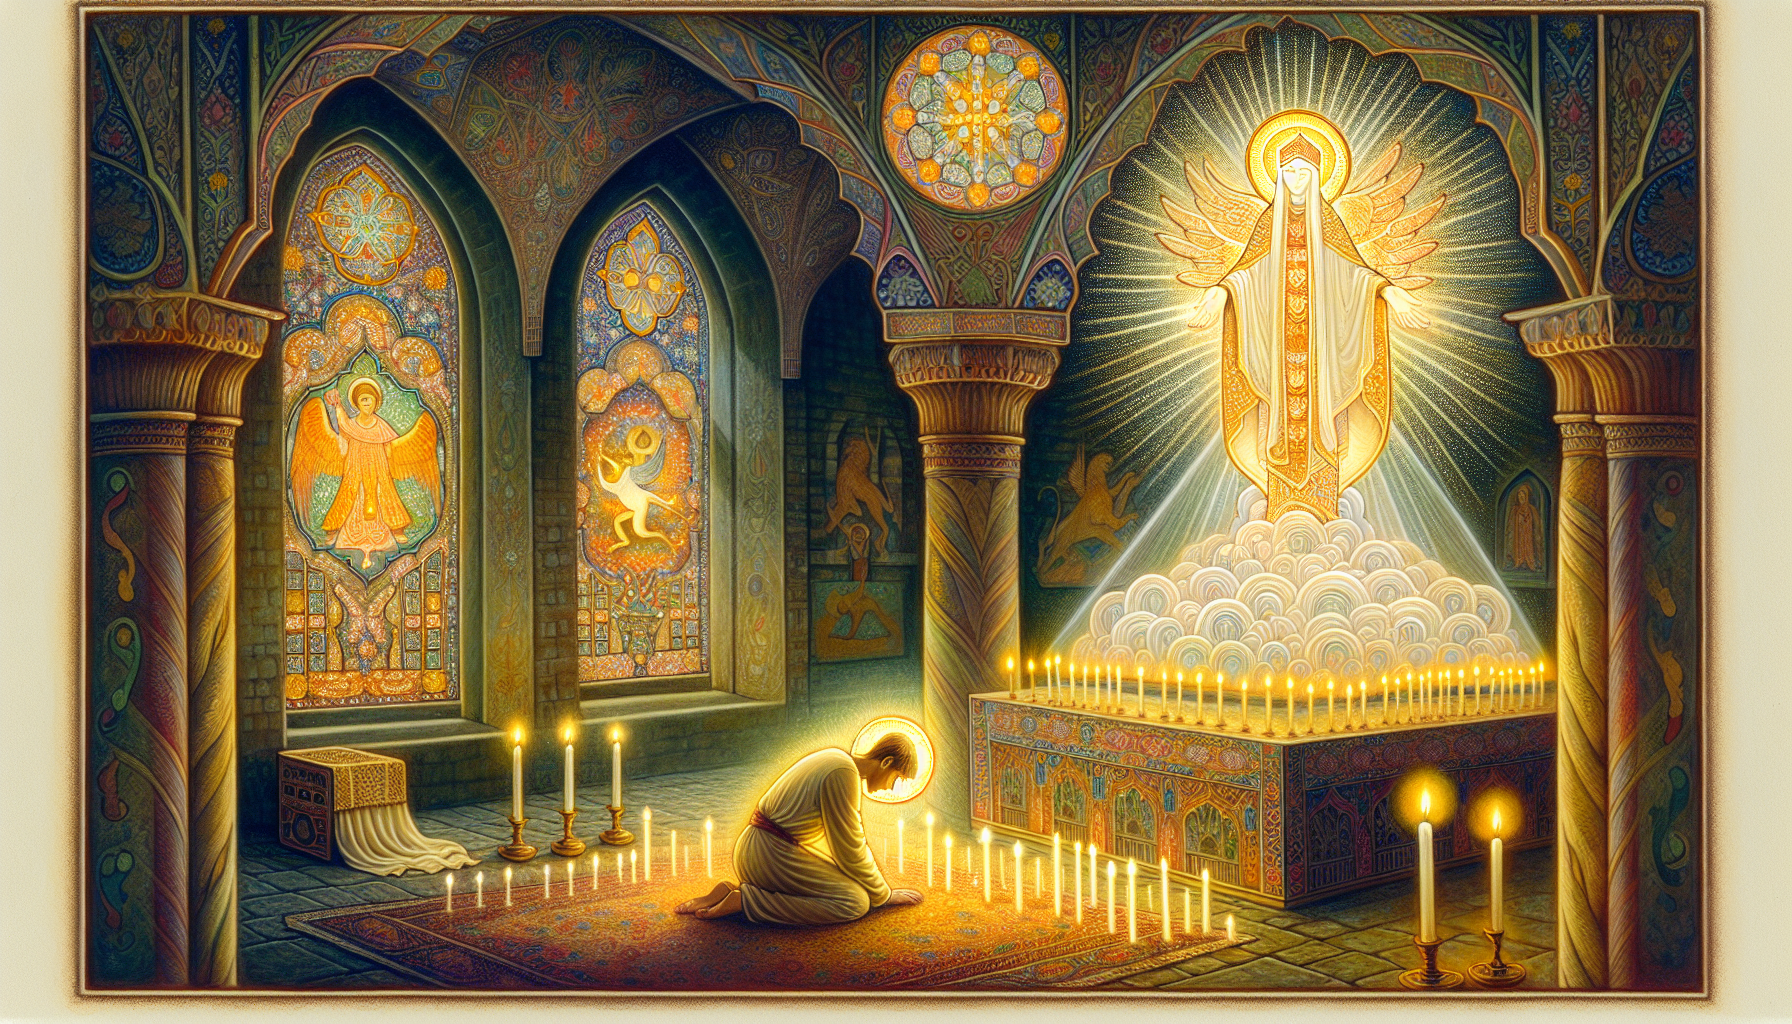 A detailed, ethereal artwork depicting a serene medieval church setting adorned with candles and stained glass windows, showing a devout figure kneeling in prayer to Saint Mark of Leon. The atmosphere